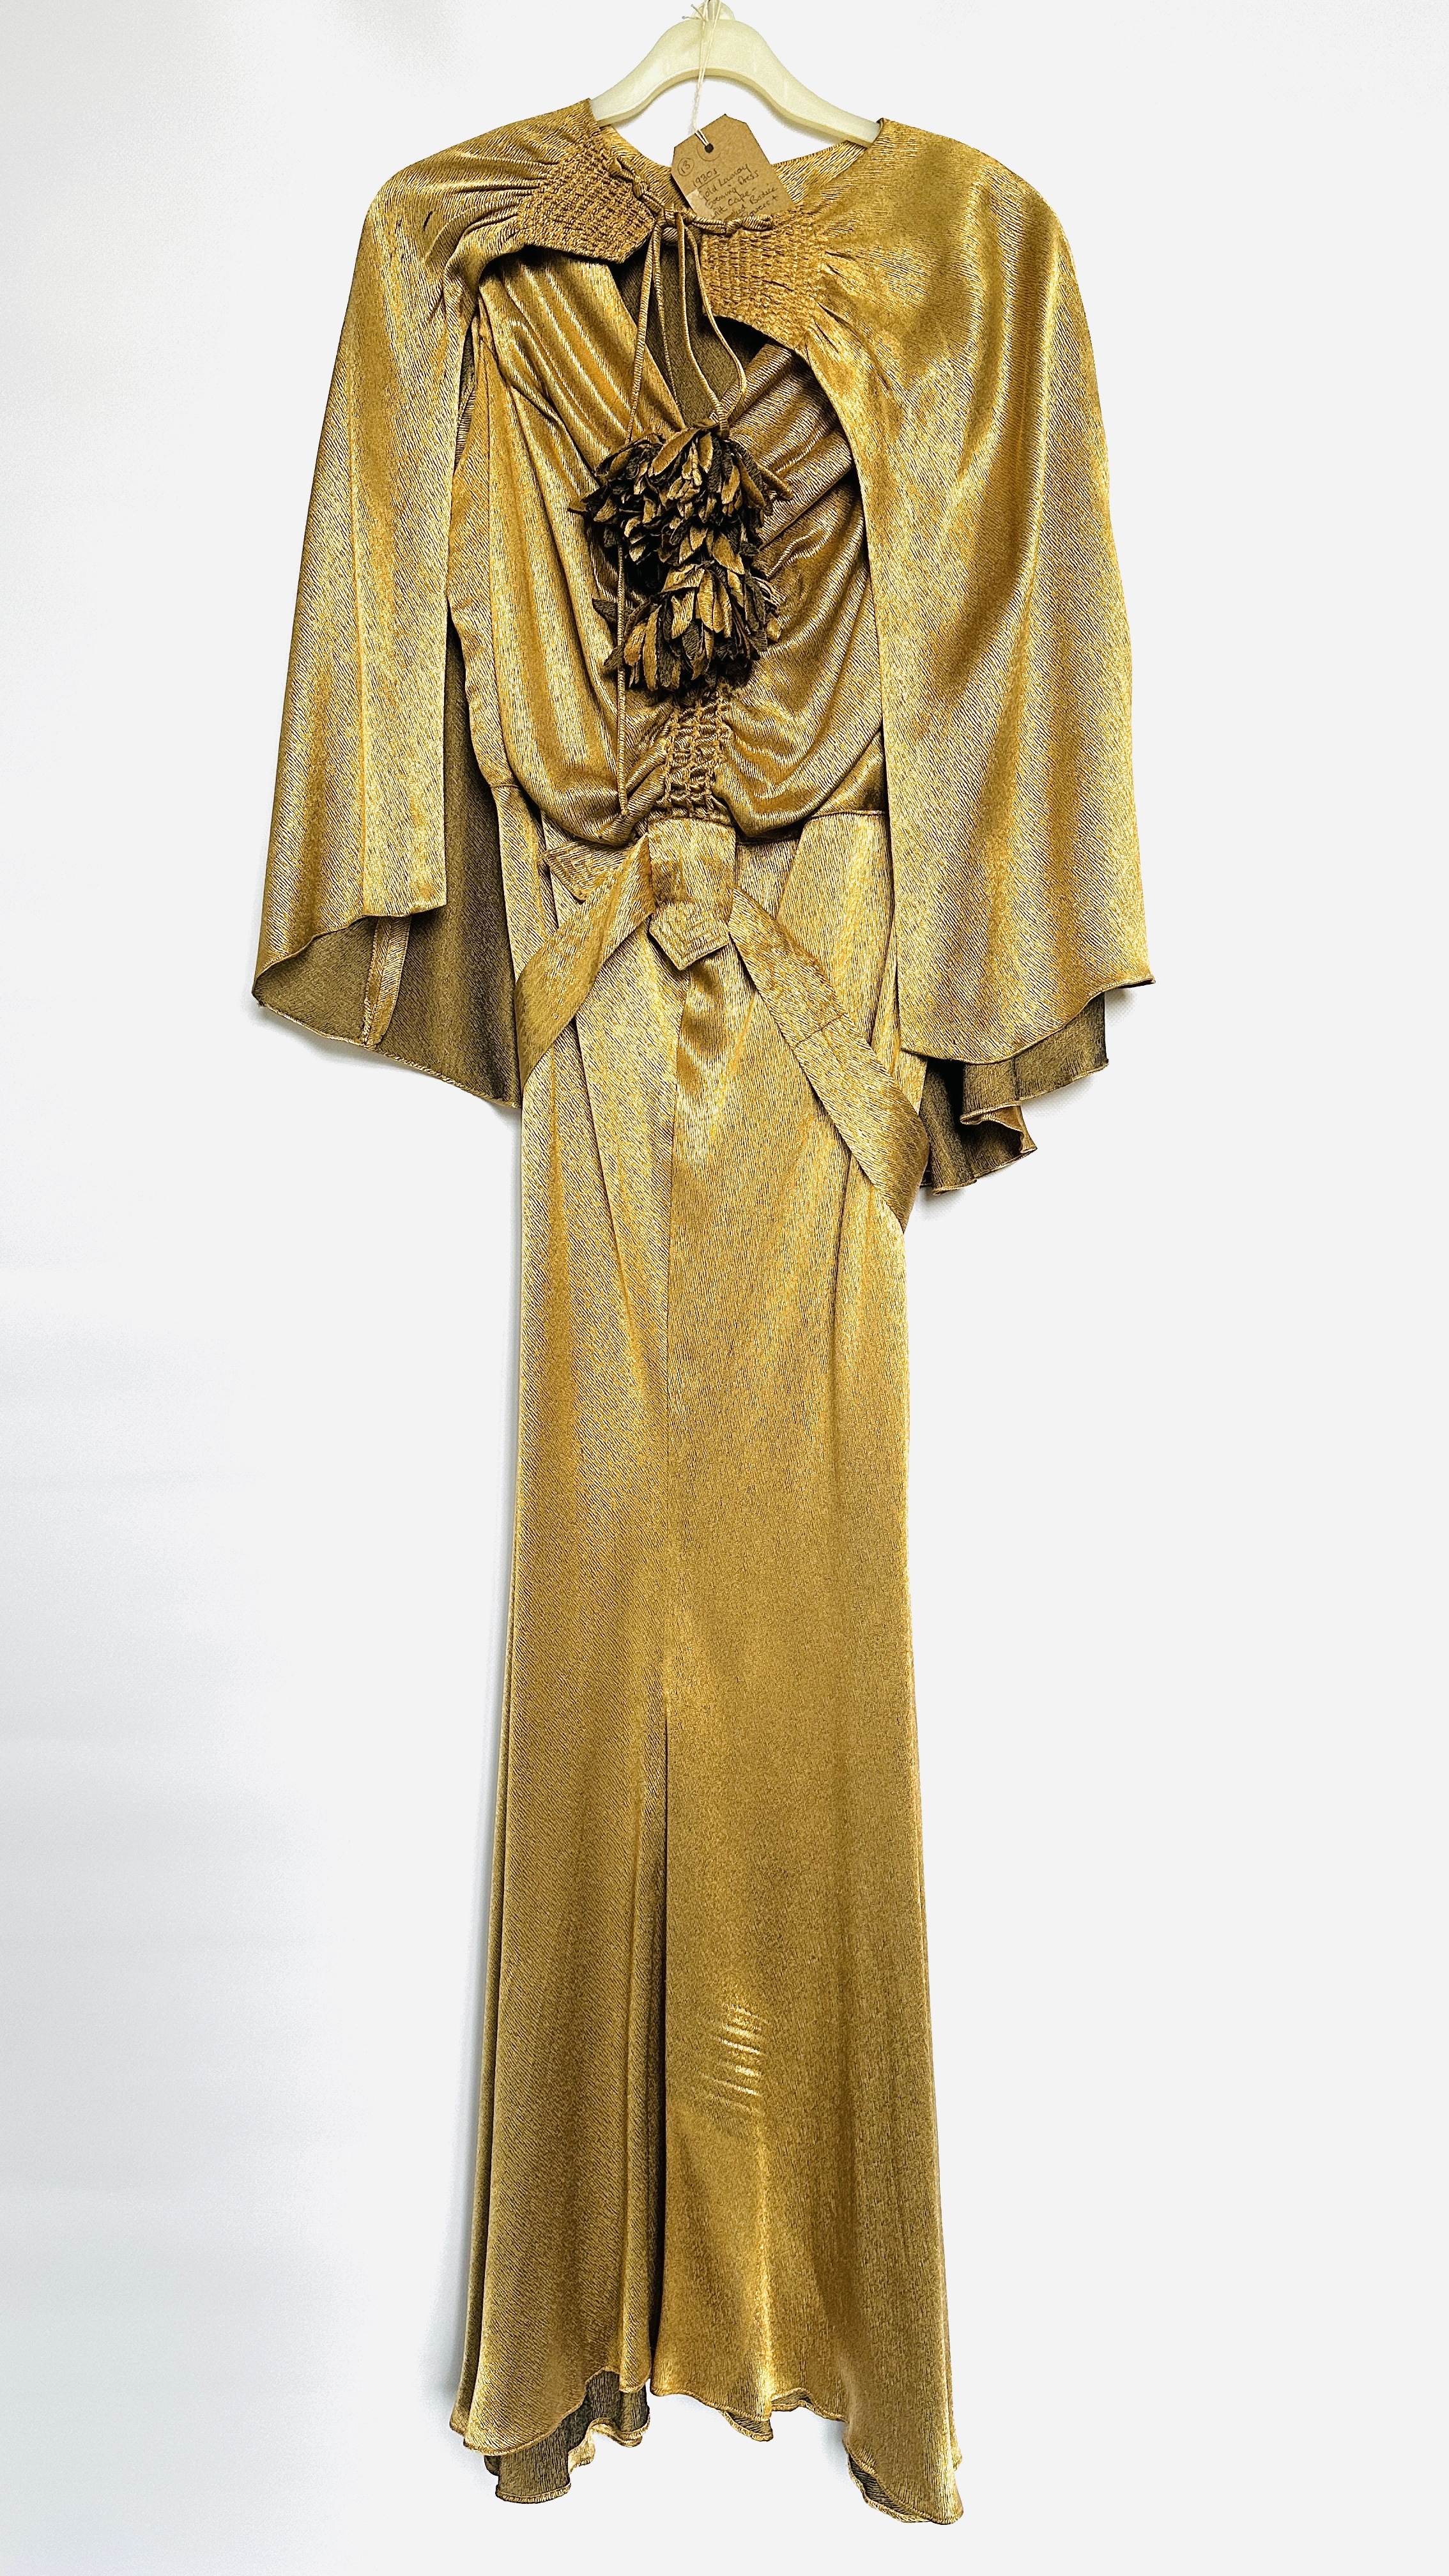 1930S GOLD LAMÉ EVENING DRESS WITH CAPE, RUCHED BODICE WITH FLOWERS AND BELT - A/F CONDITION,